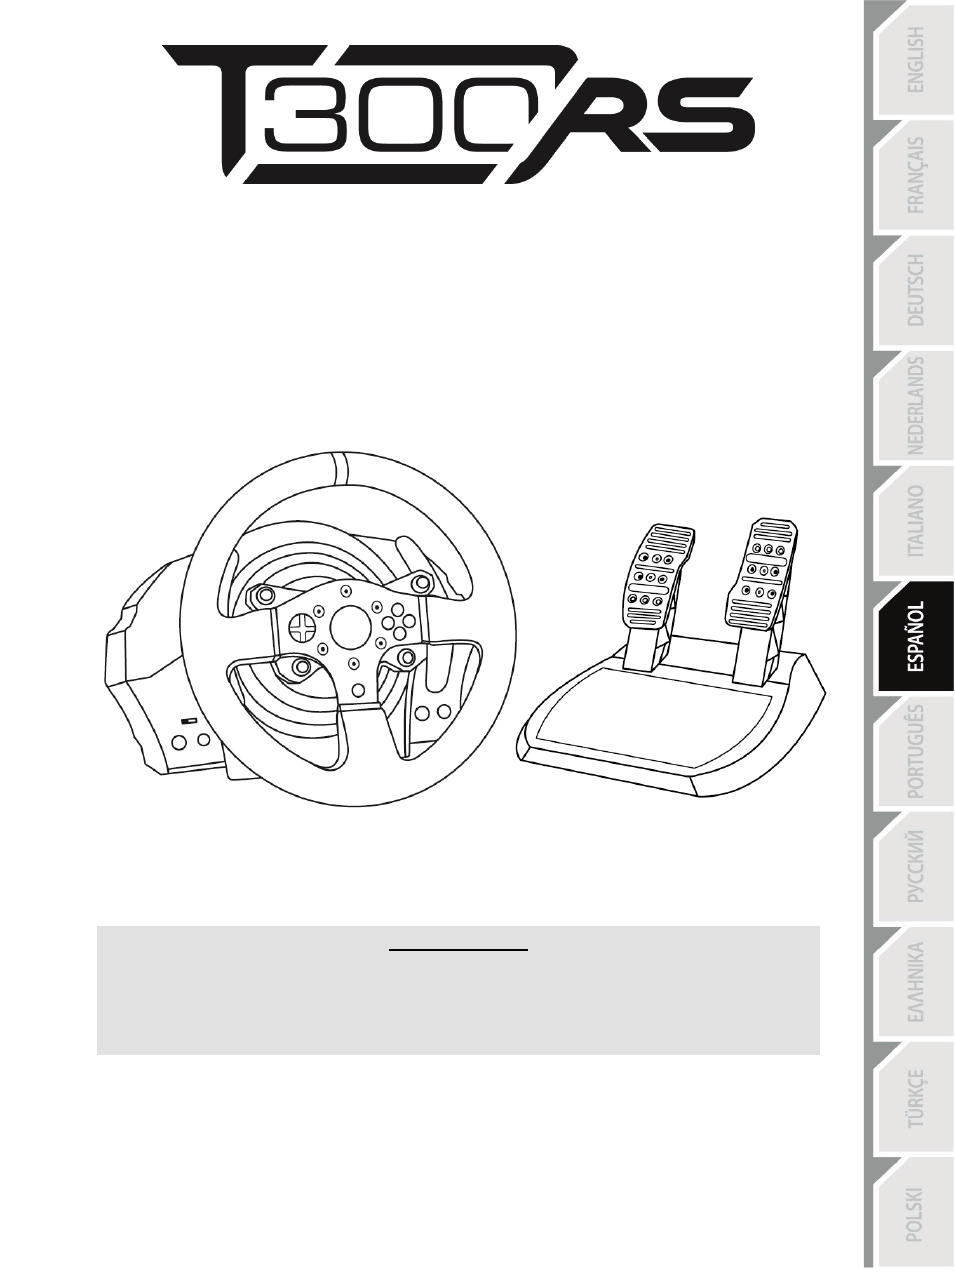 06_spa_t300rs ps3-ps4, Español | Thrustmaster T300 Ferrari GTE User Manual  | Page 92 / 375